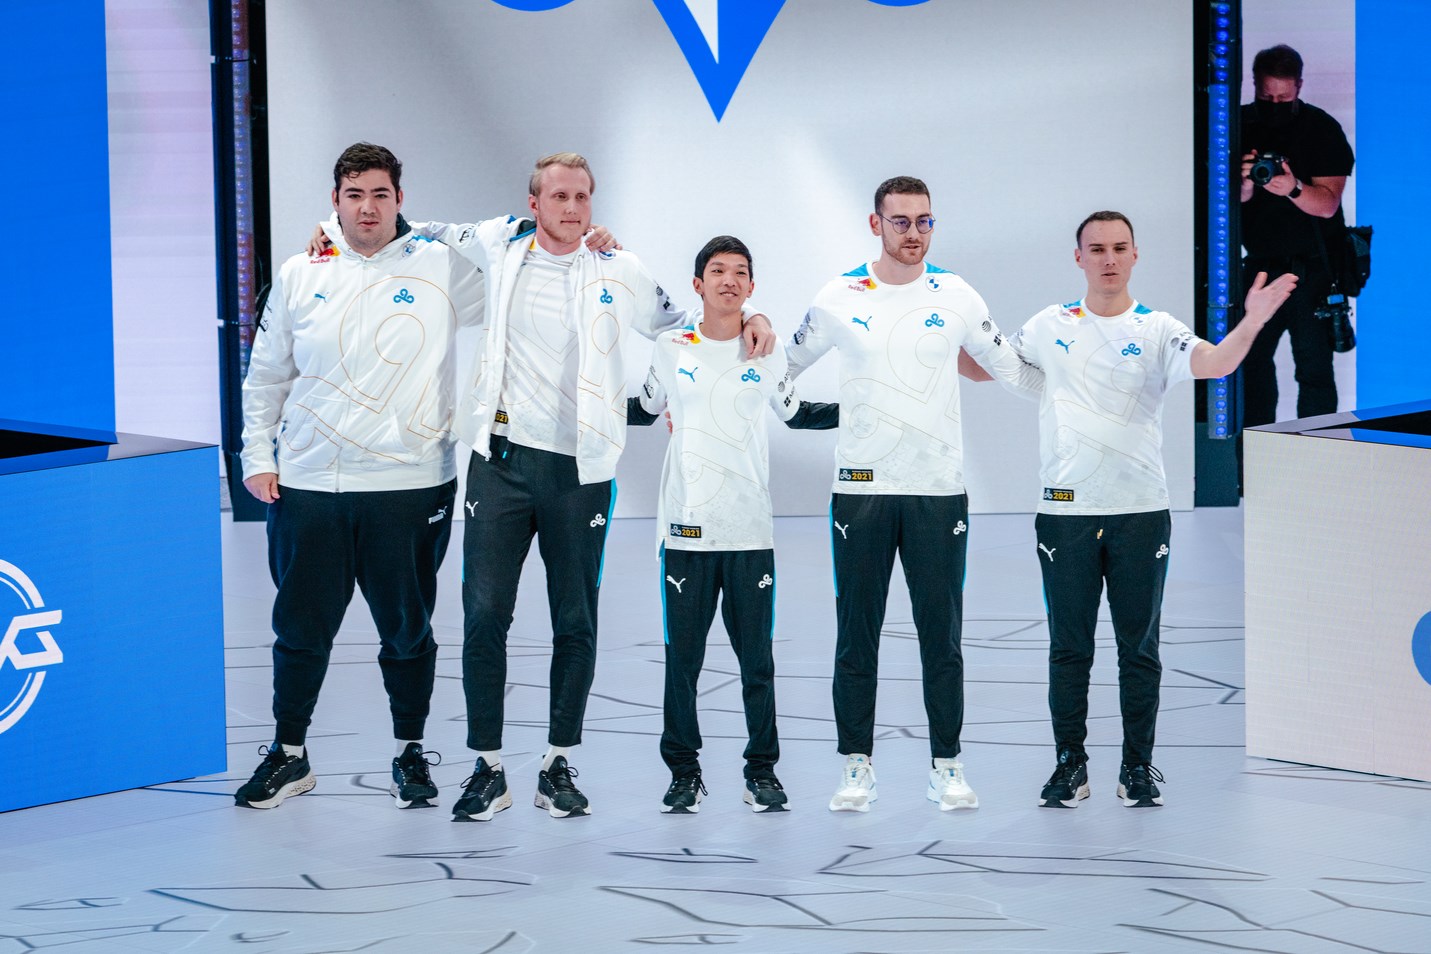 Cloud9 battle Unicorns of Love in last game of Worlds 2021 play-in group stage - Dot Esports